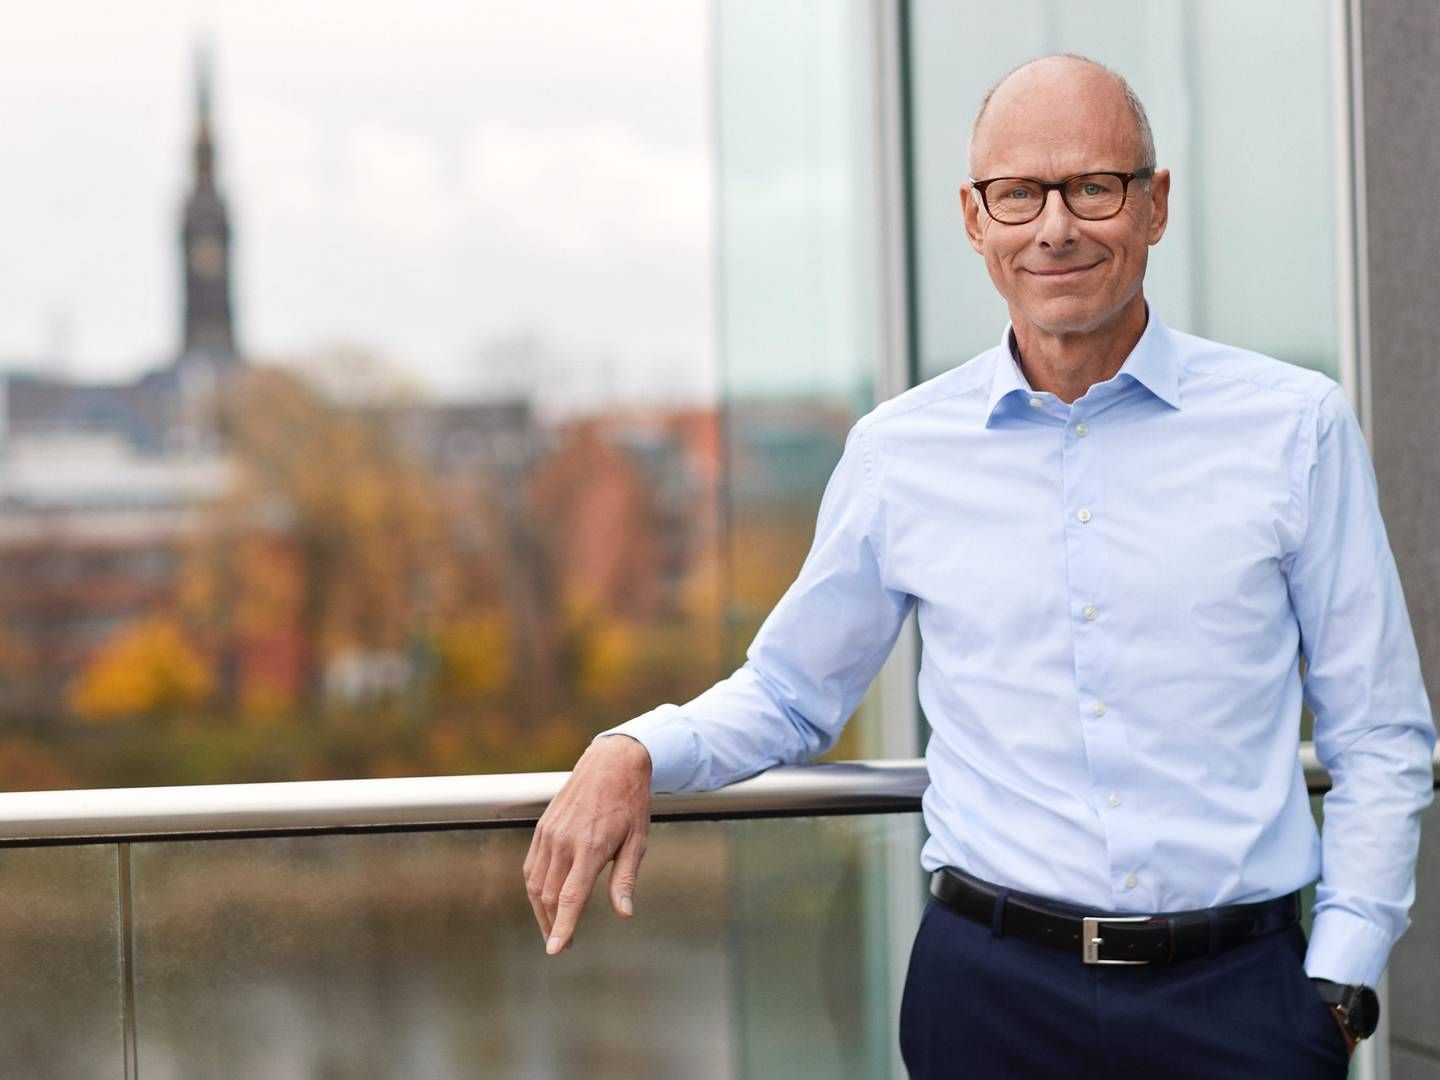 Klaus Holse is chairman of the Confederation of Danish Industry and board member of at tech firm Terma – both roles with ties to William Demant Invest CEO Niels Jacobsen | Photo: Pr / Dansk Industri